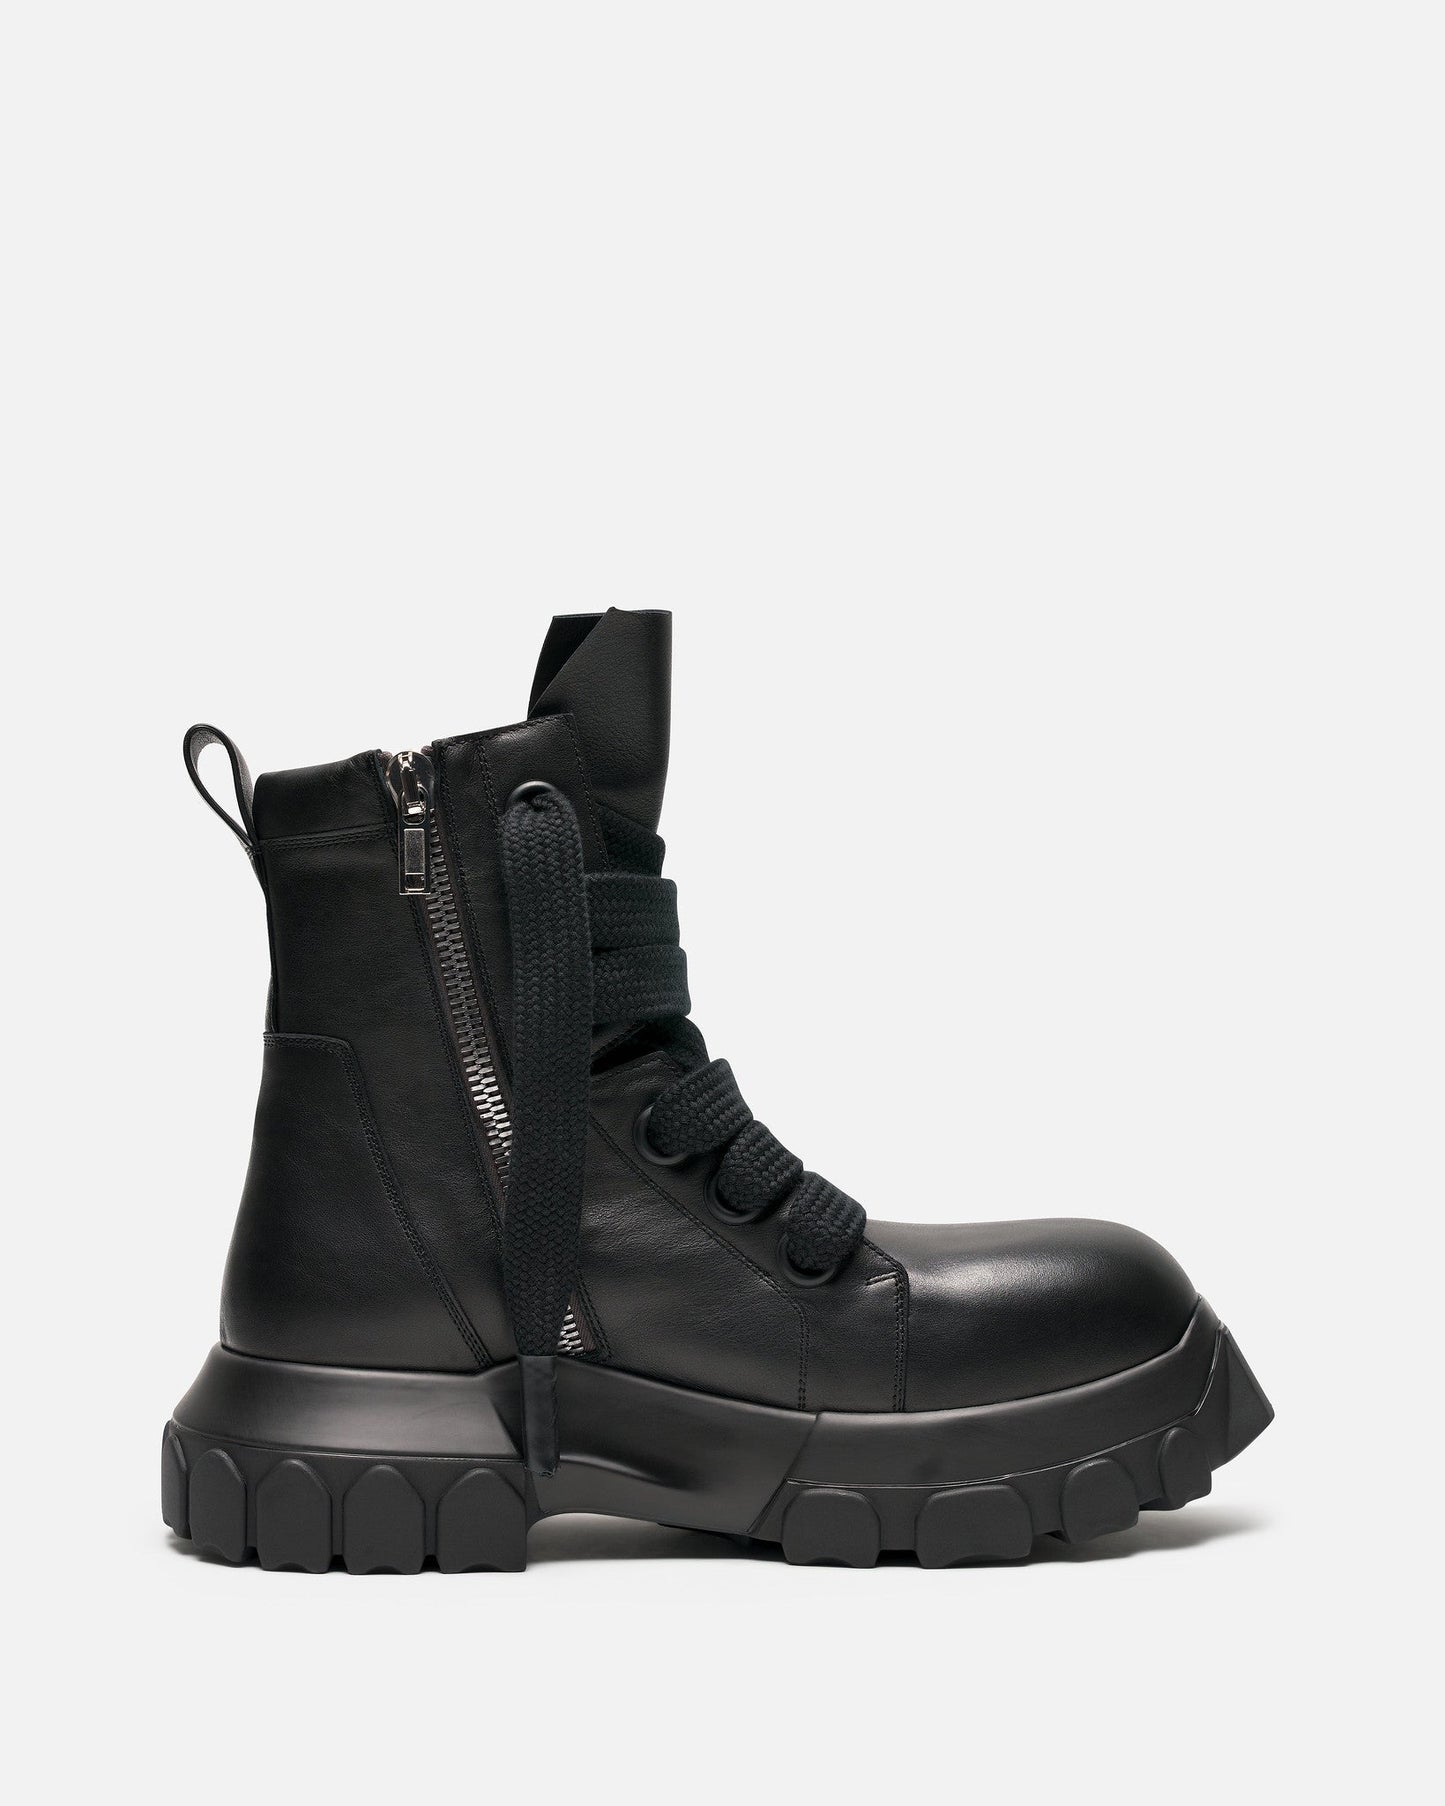 Rick Owens Men's Boots Wide Lace Bozo Tractor Boot in Black/Black